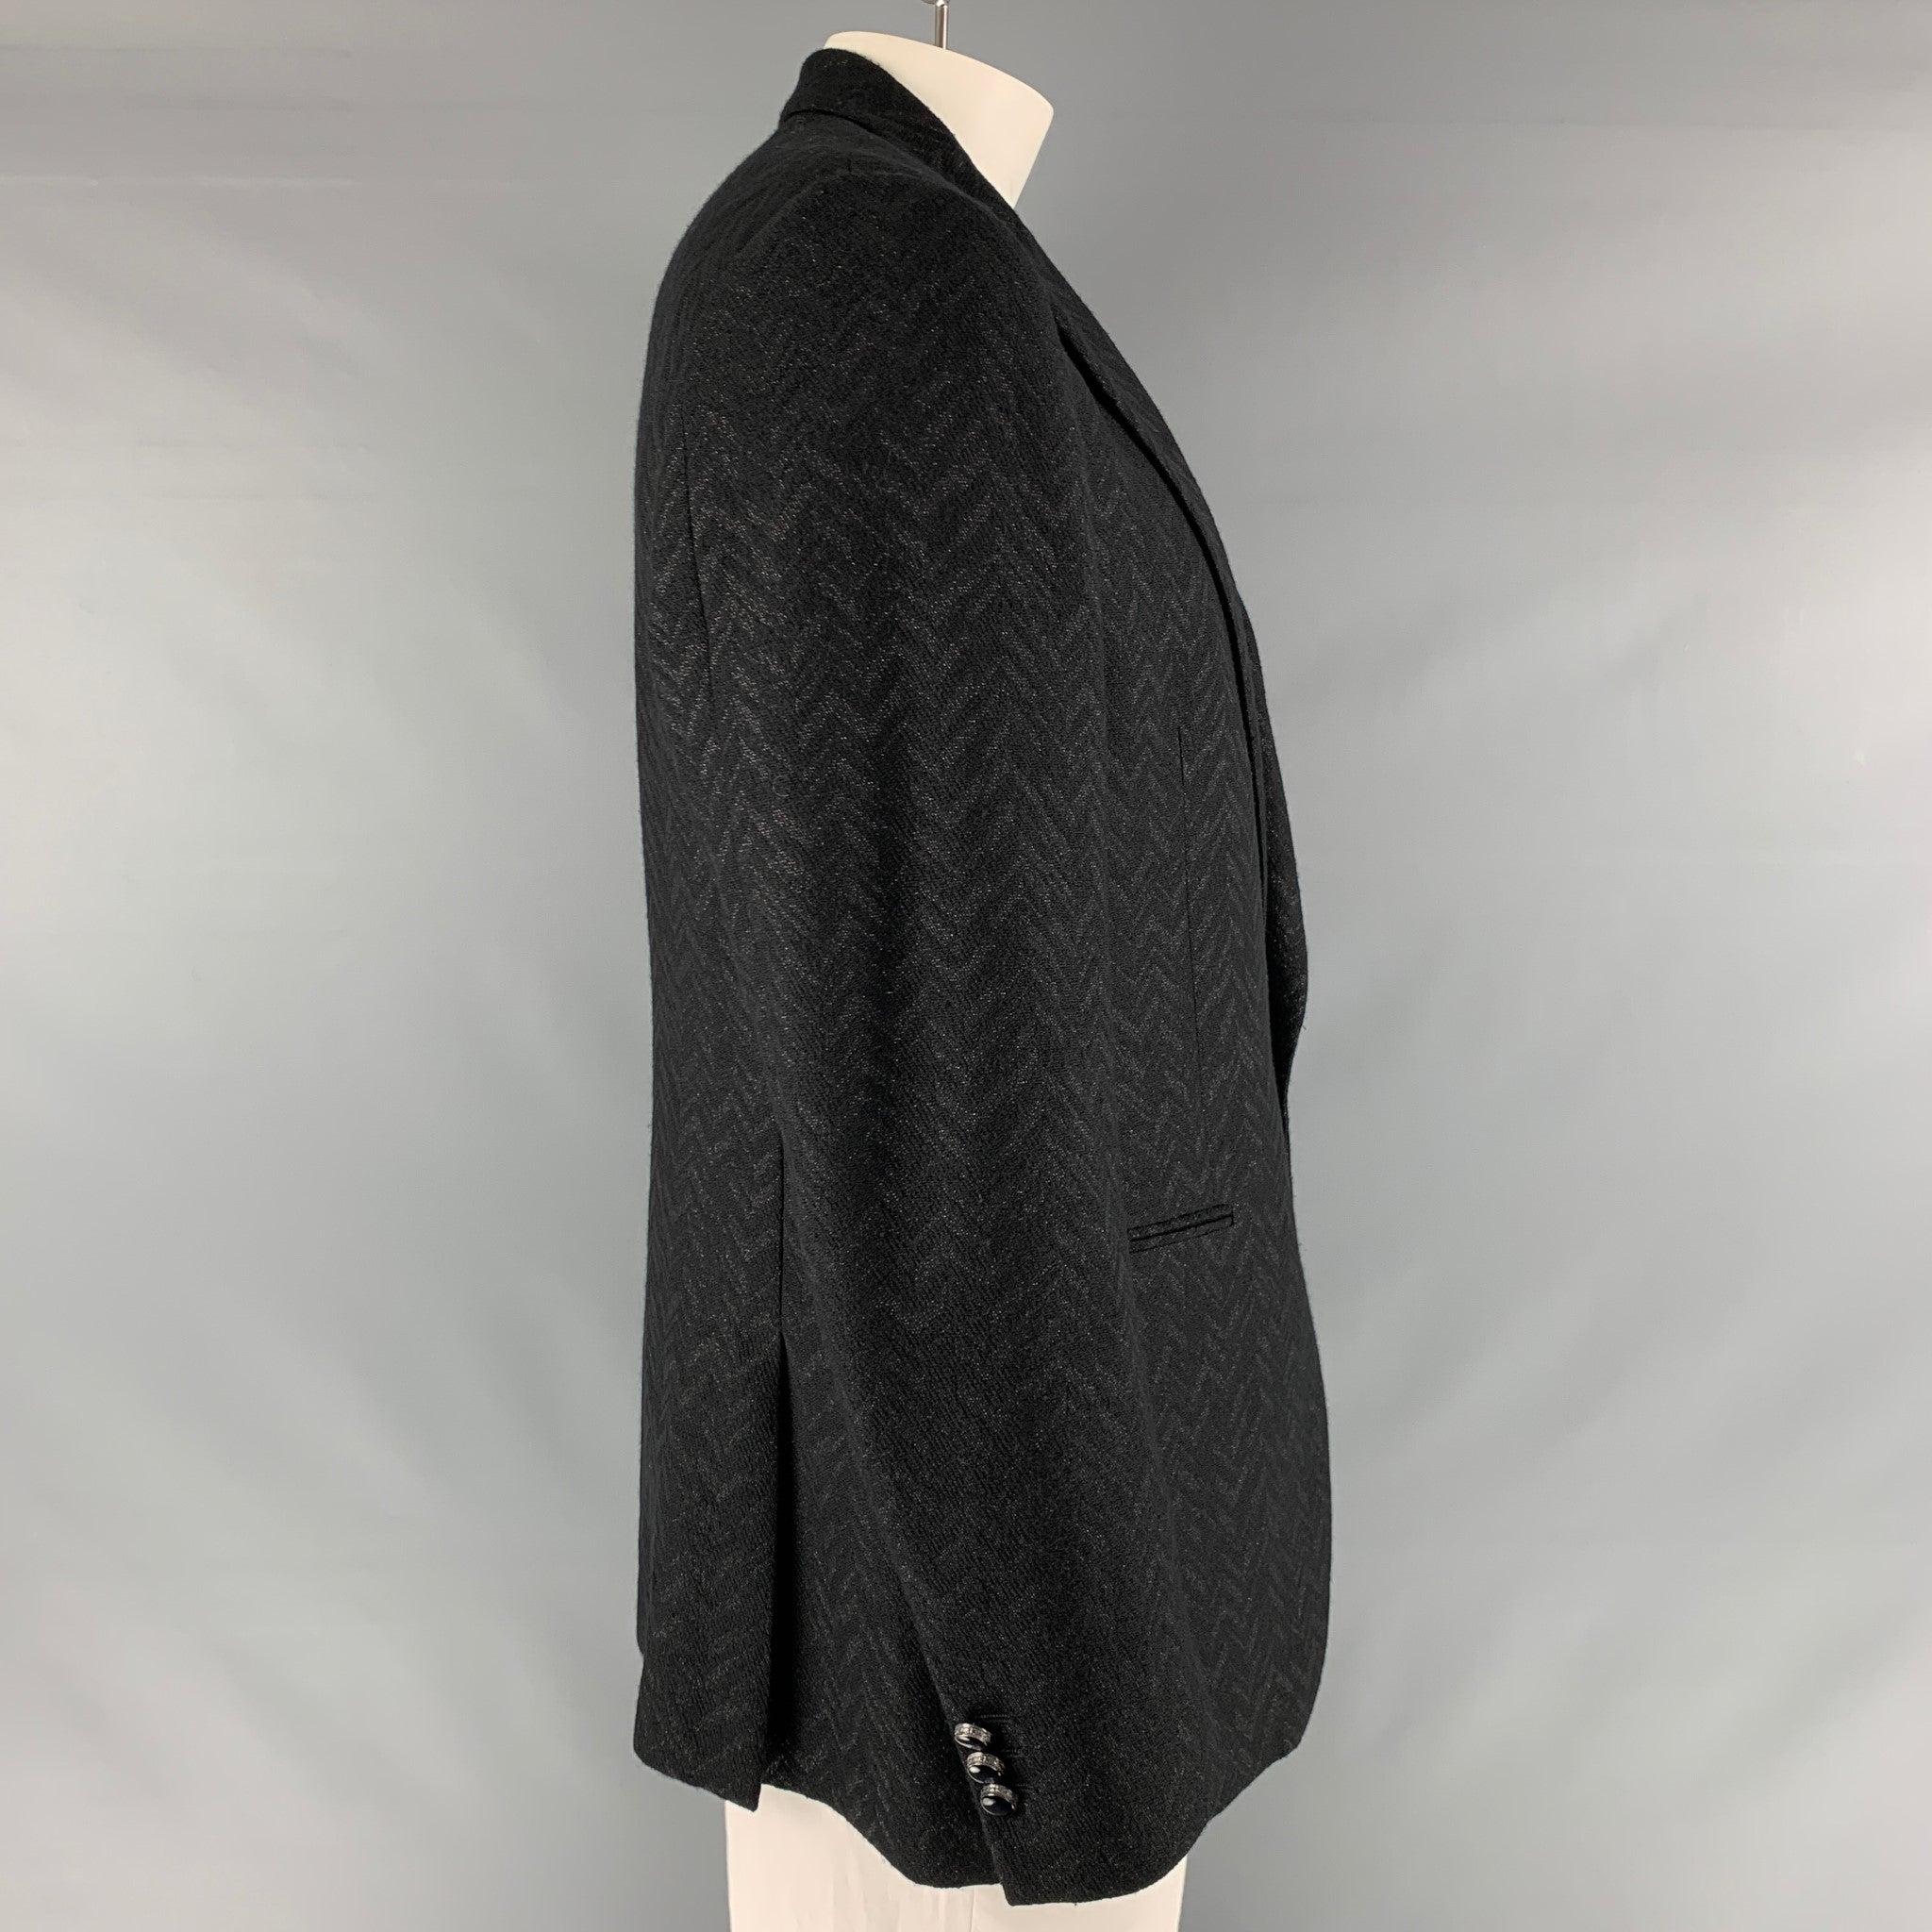 ETRO sport coat comes in a black novelty metallic chevron wool blend woven material with a full liner featuring a peak collar, welt pockets, and a single button closure. Made in Italy.Excellent Pre-Owned Condition. 

Marked:   IT 54 

Measurements: